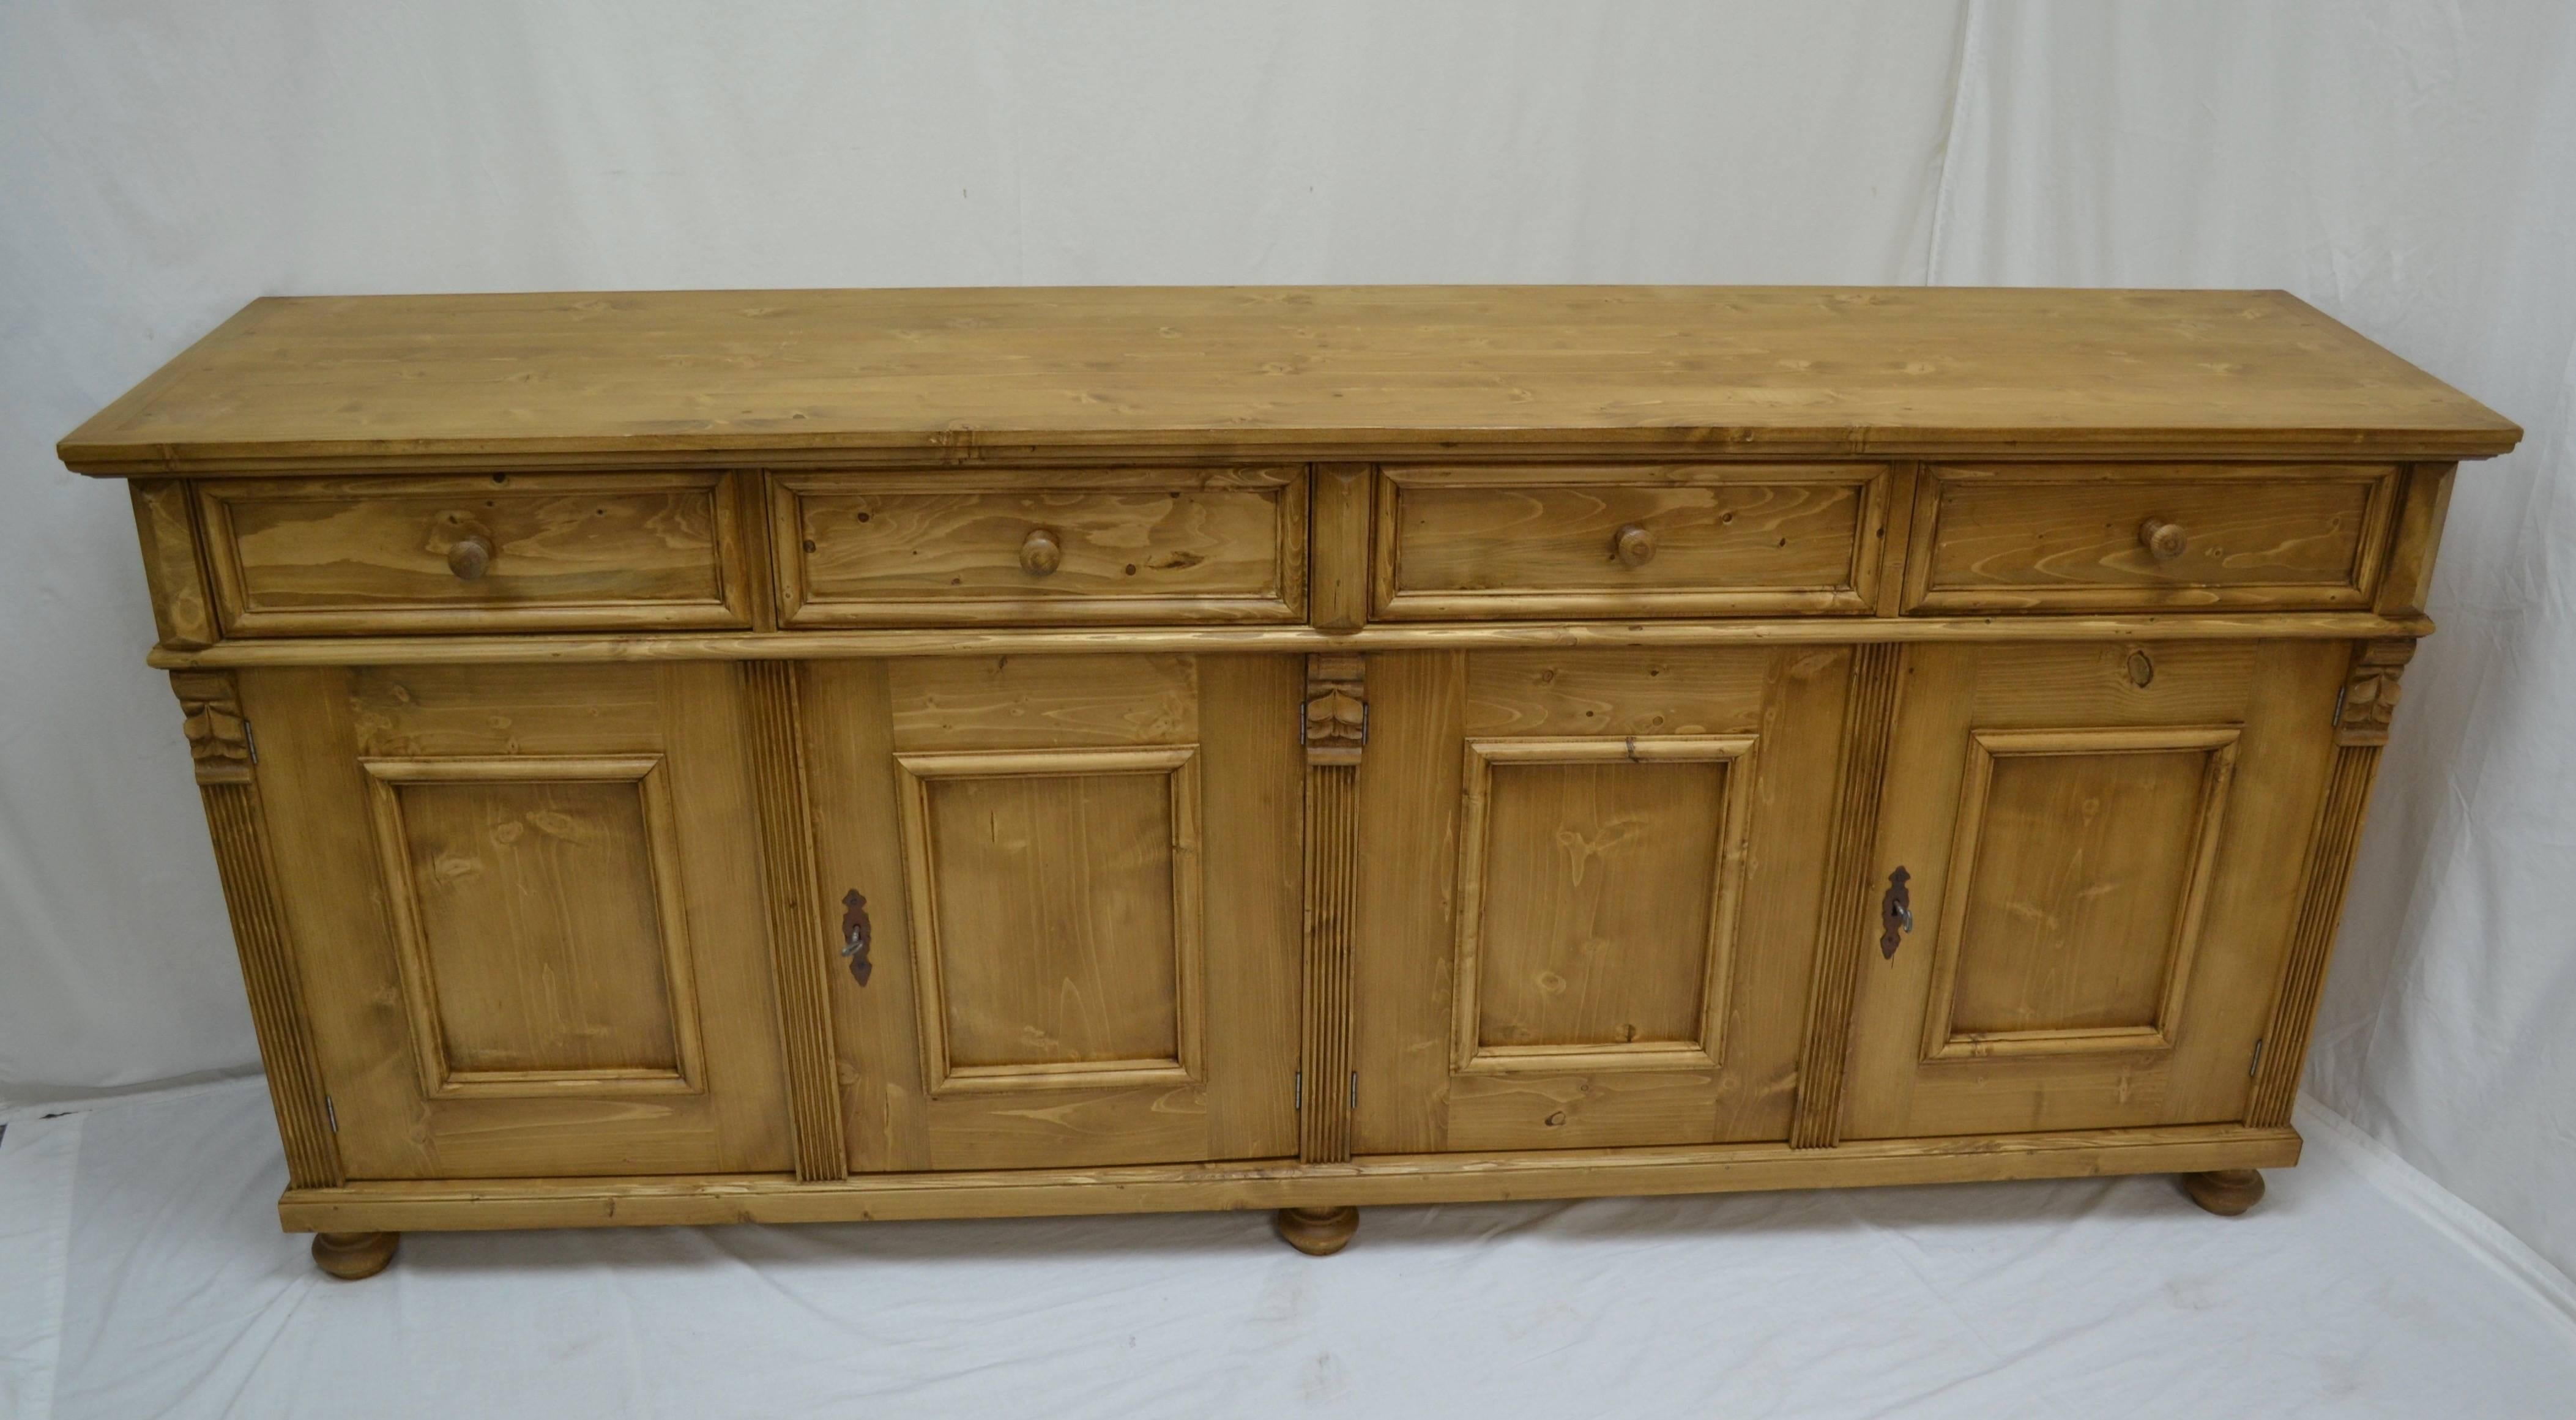 Antique pine sideboards can be hard to find so our workshop in Europe takes lightly-used pine to build this piece using traditional design features and construction techniques. 
This most versatile piece works well as a double vanity in the